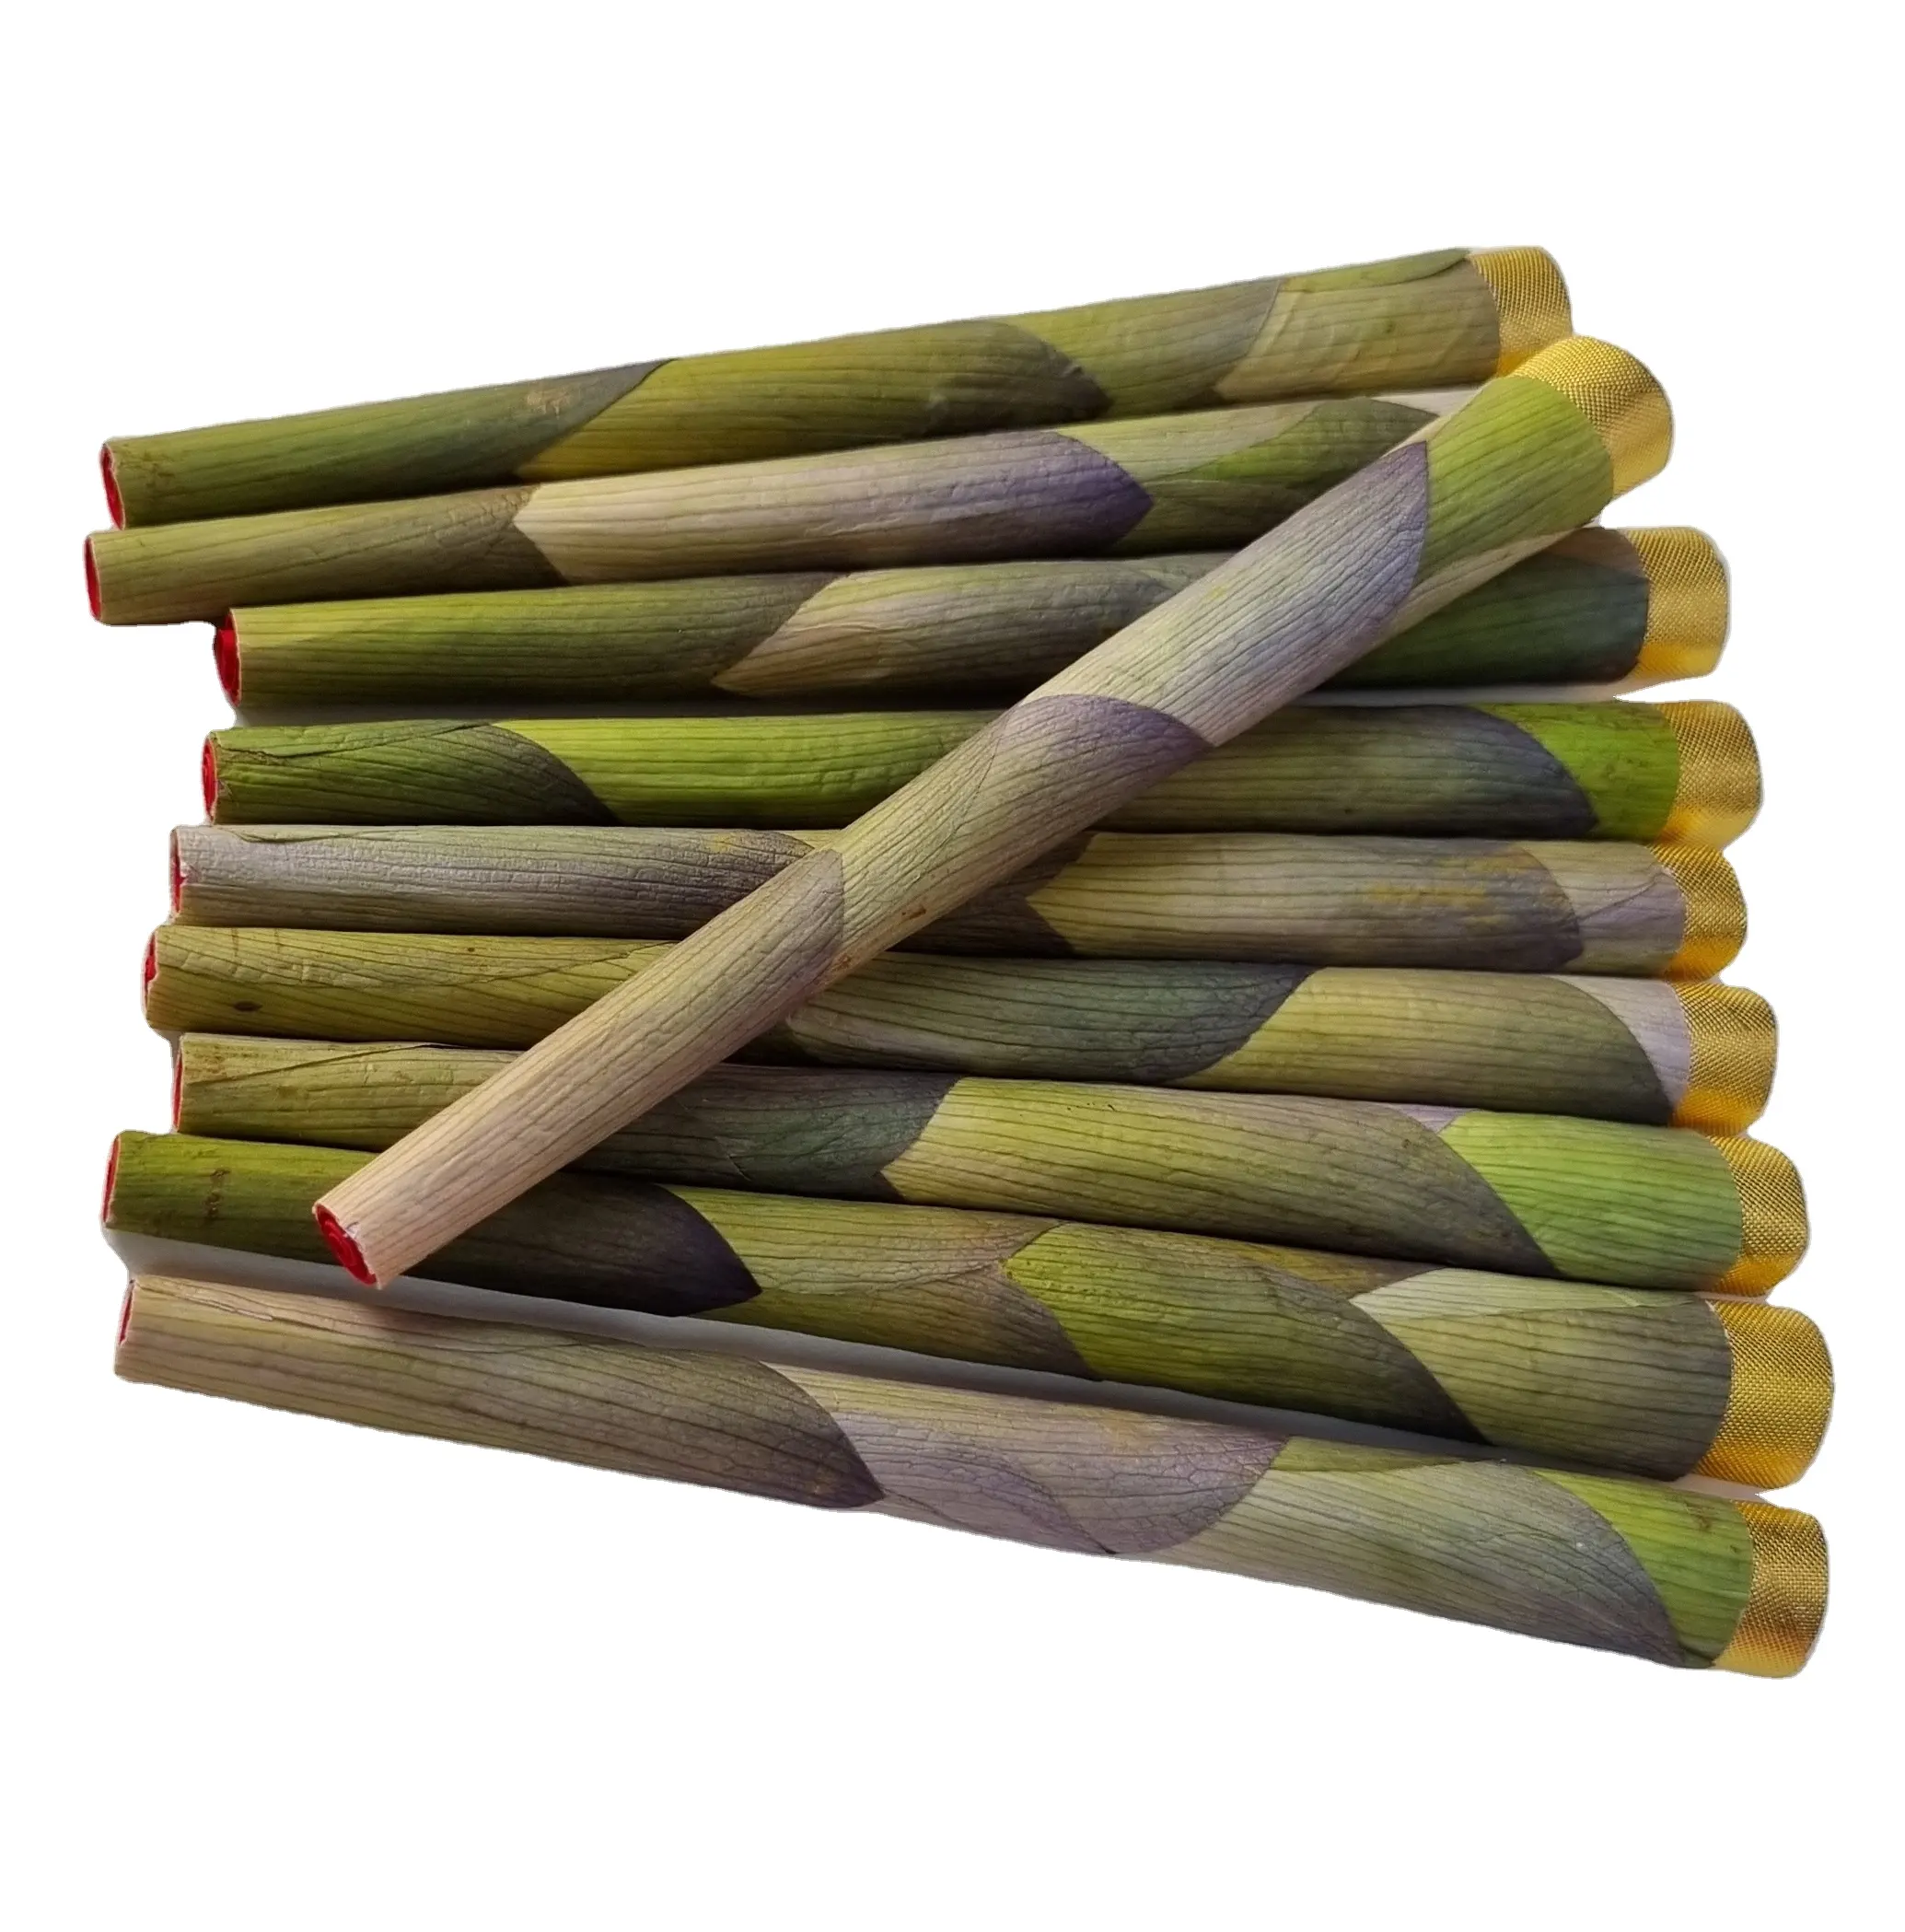 Rare green palm lotus cones glass & wood tips Lotus Rolls Beautifully Hand rolled Real Flower Lotus petal cones queen King Sizes